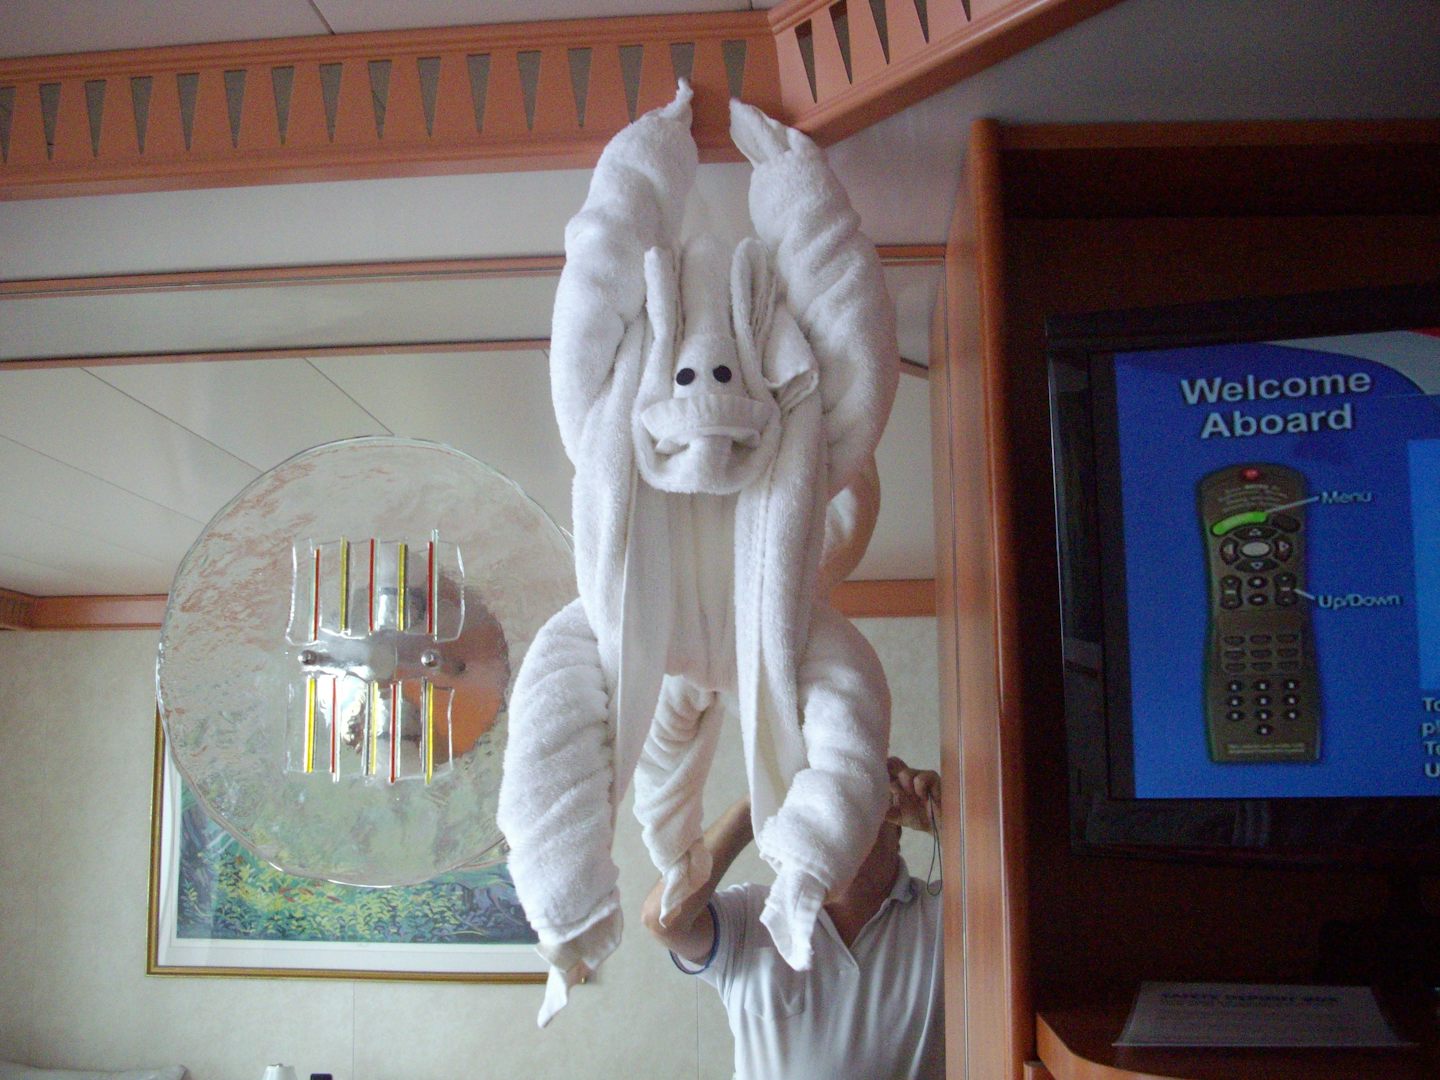 The cabin staff folded towels into animals...each day a different one...I l